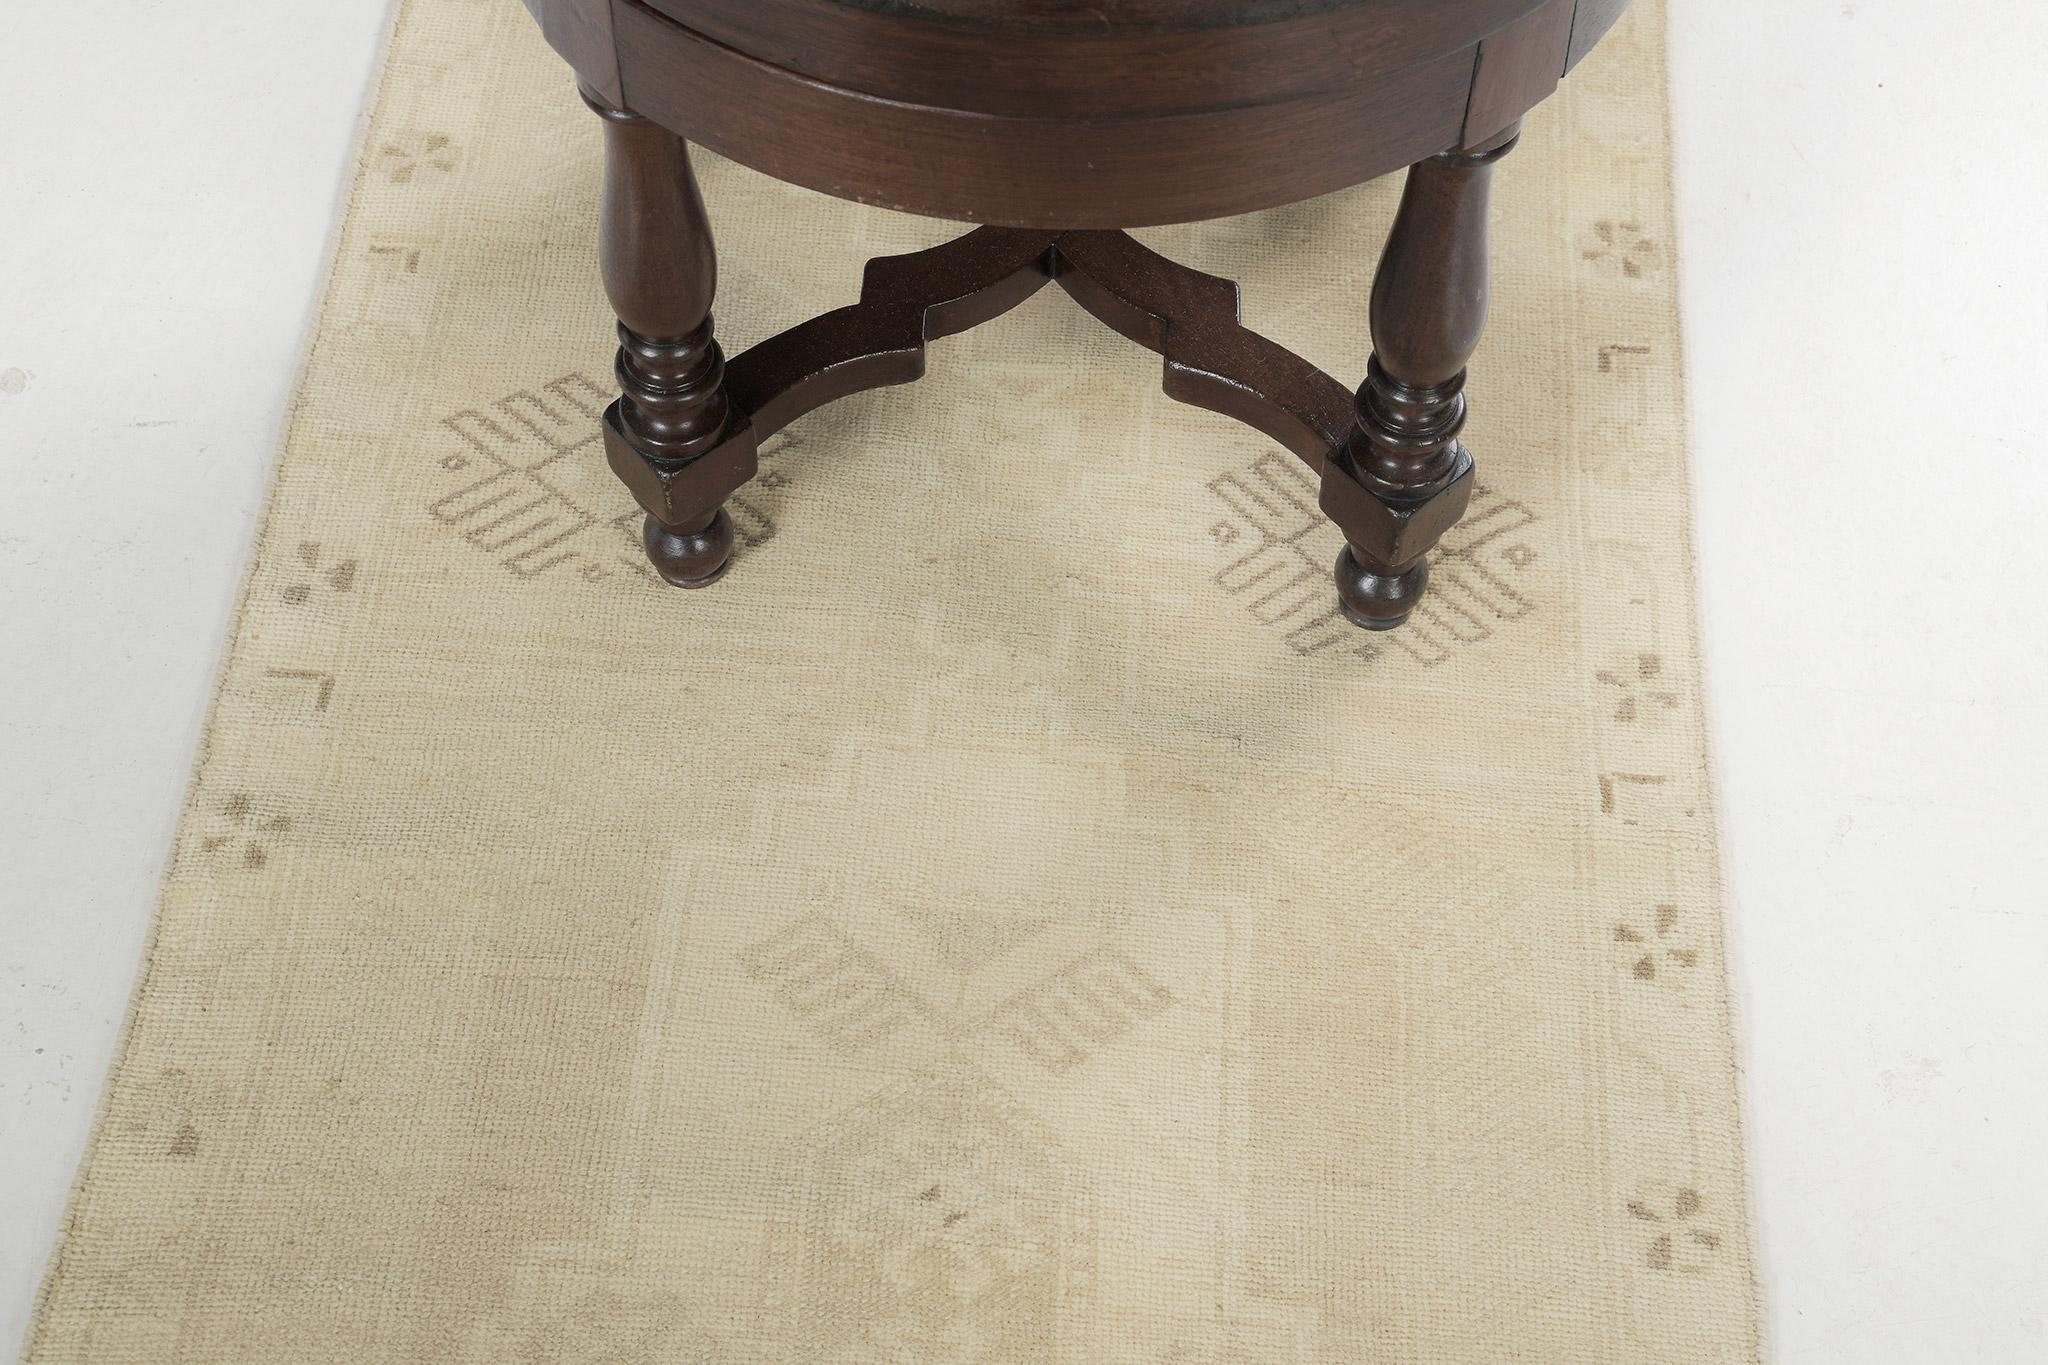 Konya is a noteworthy masterpiece that brings sophistication to any room. Three grandiose sets consisting of motifs and elements work well with the remarkable borders. Turkish Anatolian rugs weave together dyes and colors, motifs, textures, and